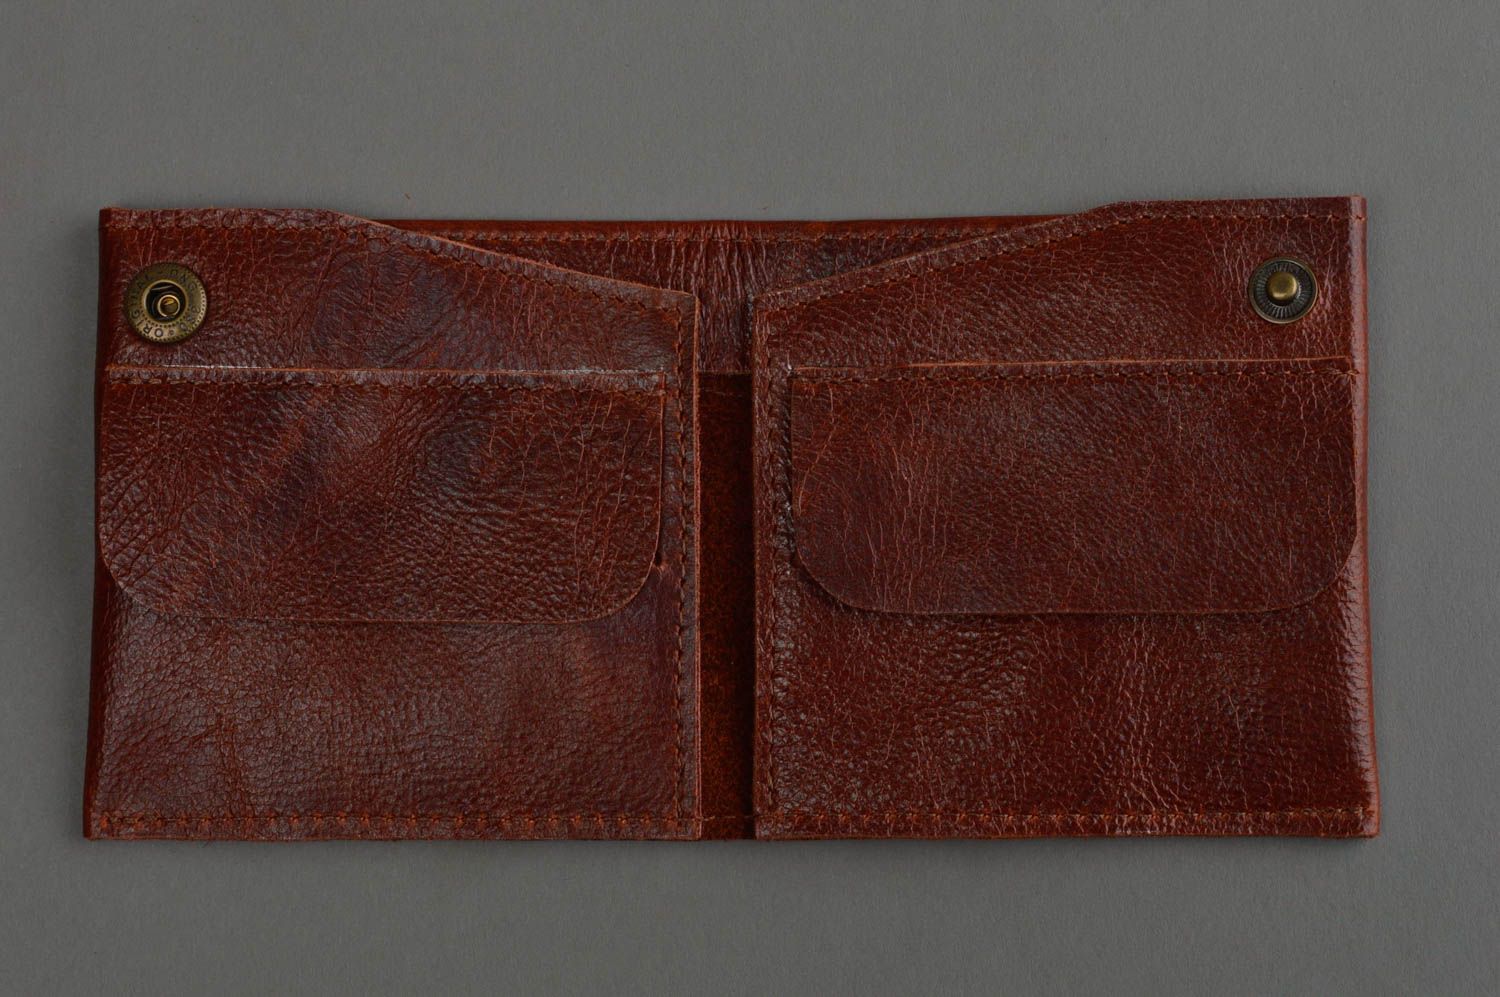 Mens leather wallet handmade leather wallet handmade leather goods gift idea photo 2